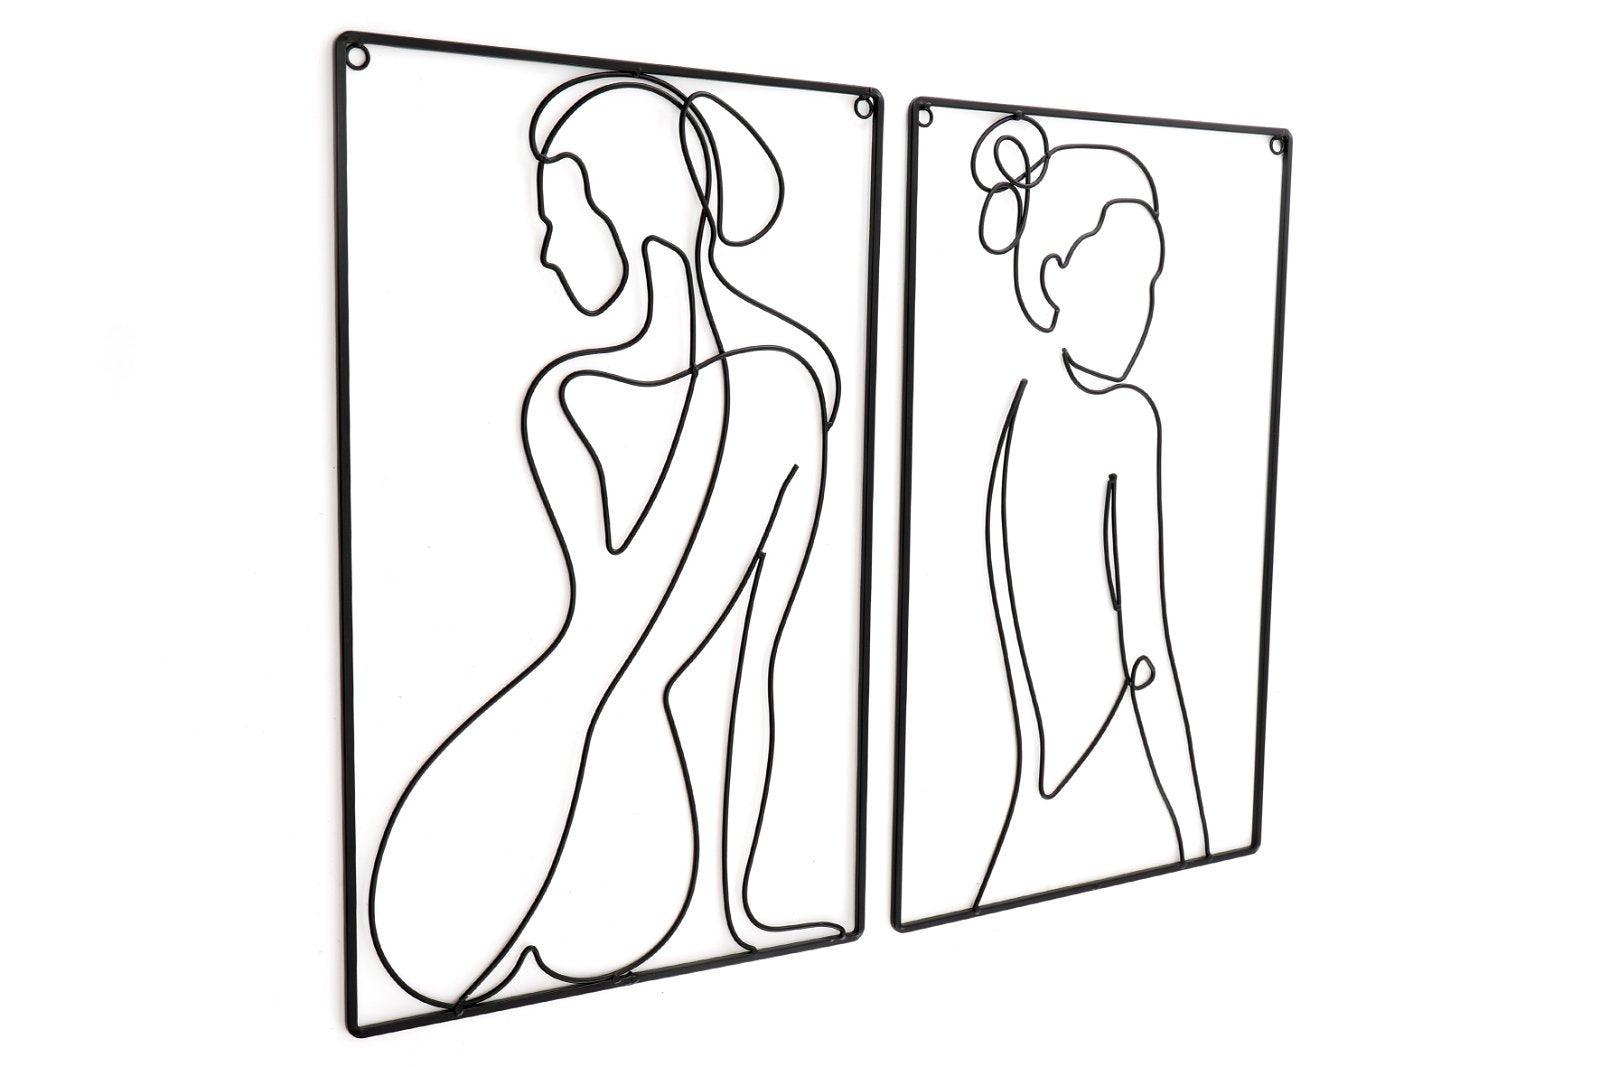 Set of 2 Black Metal Silhouette Wire Wall Decoration - £41.99 - Pictures 